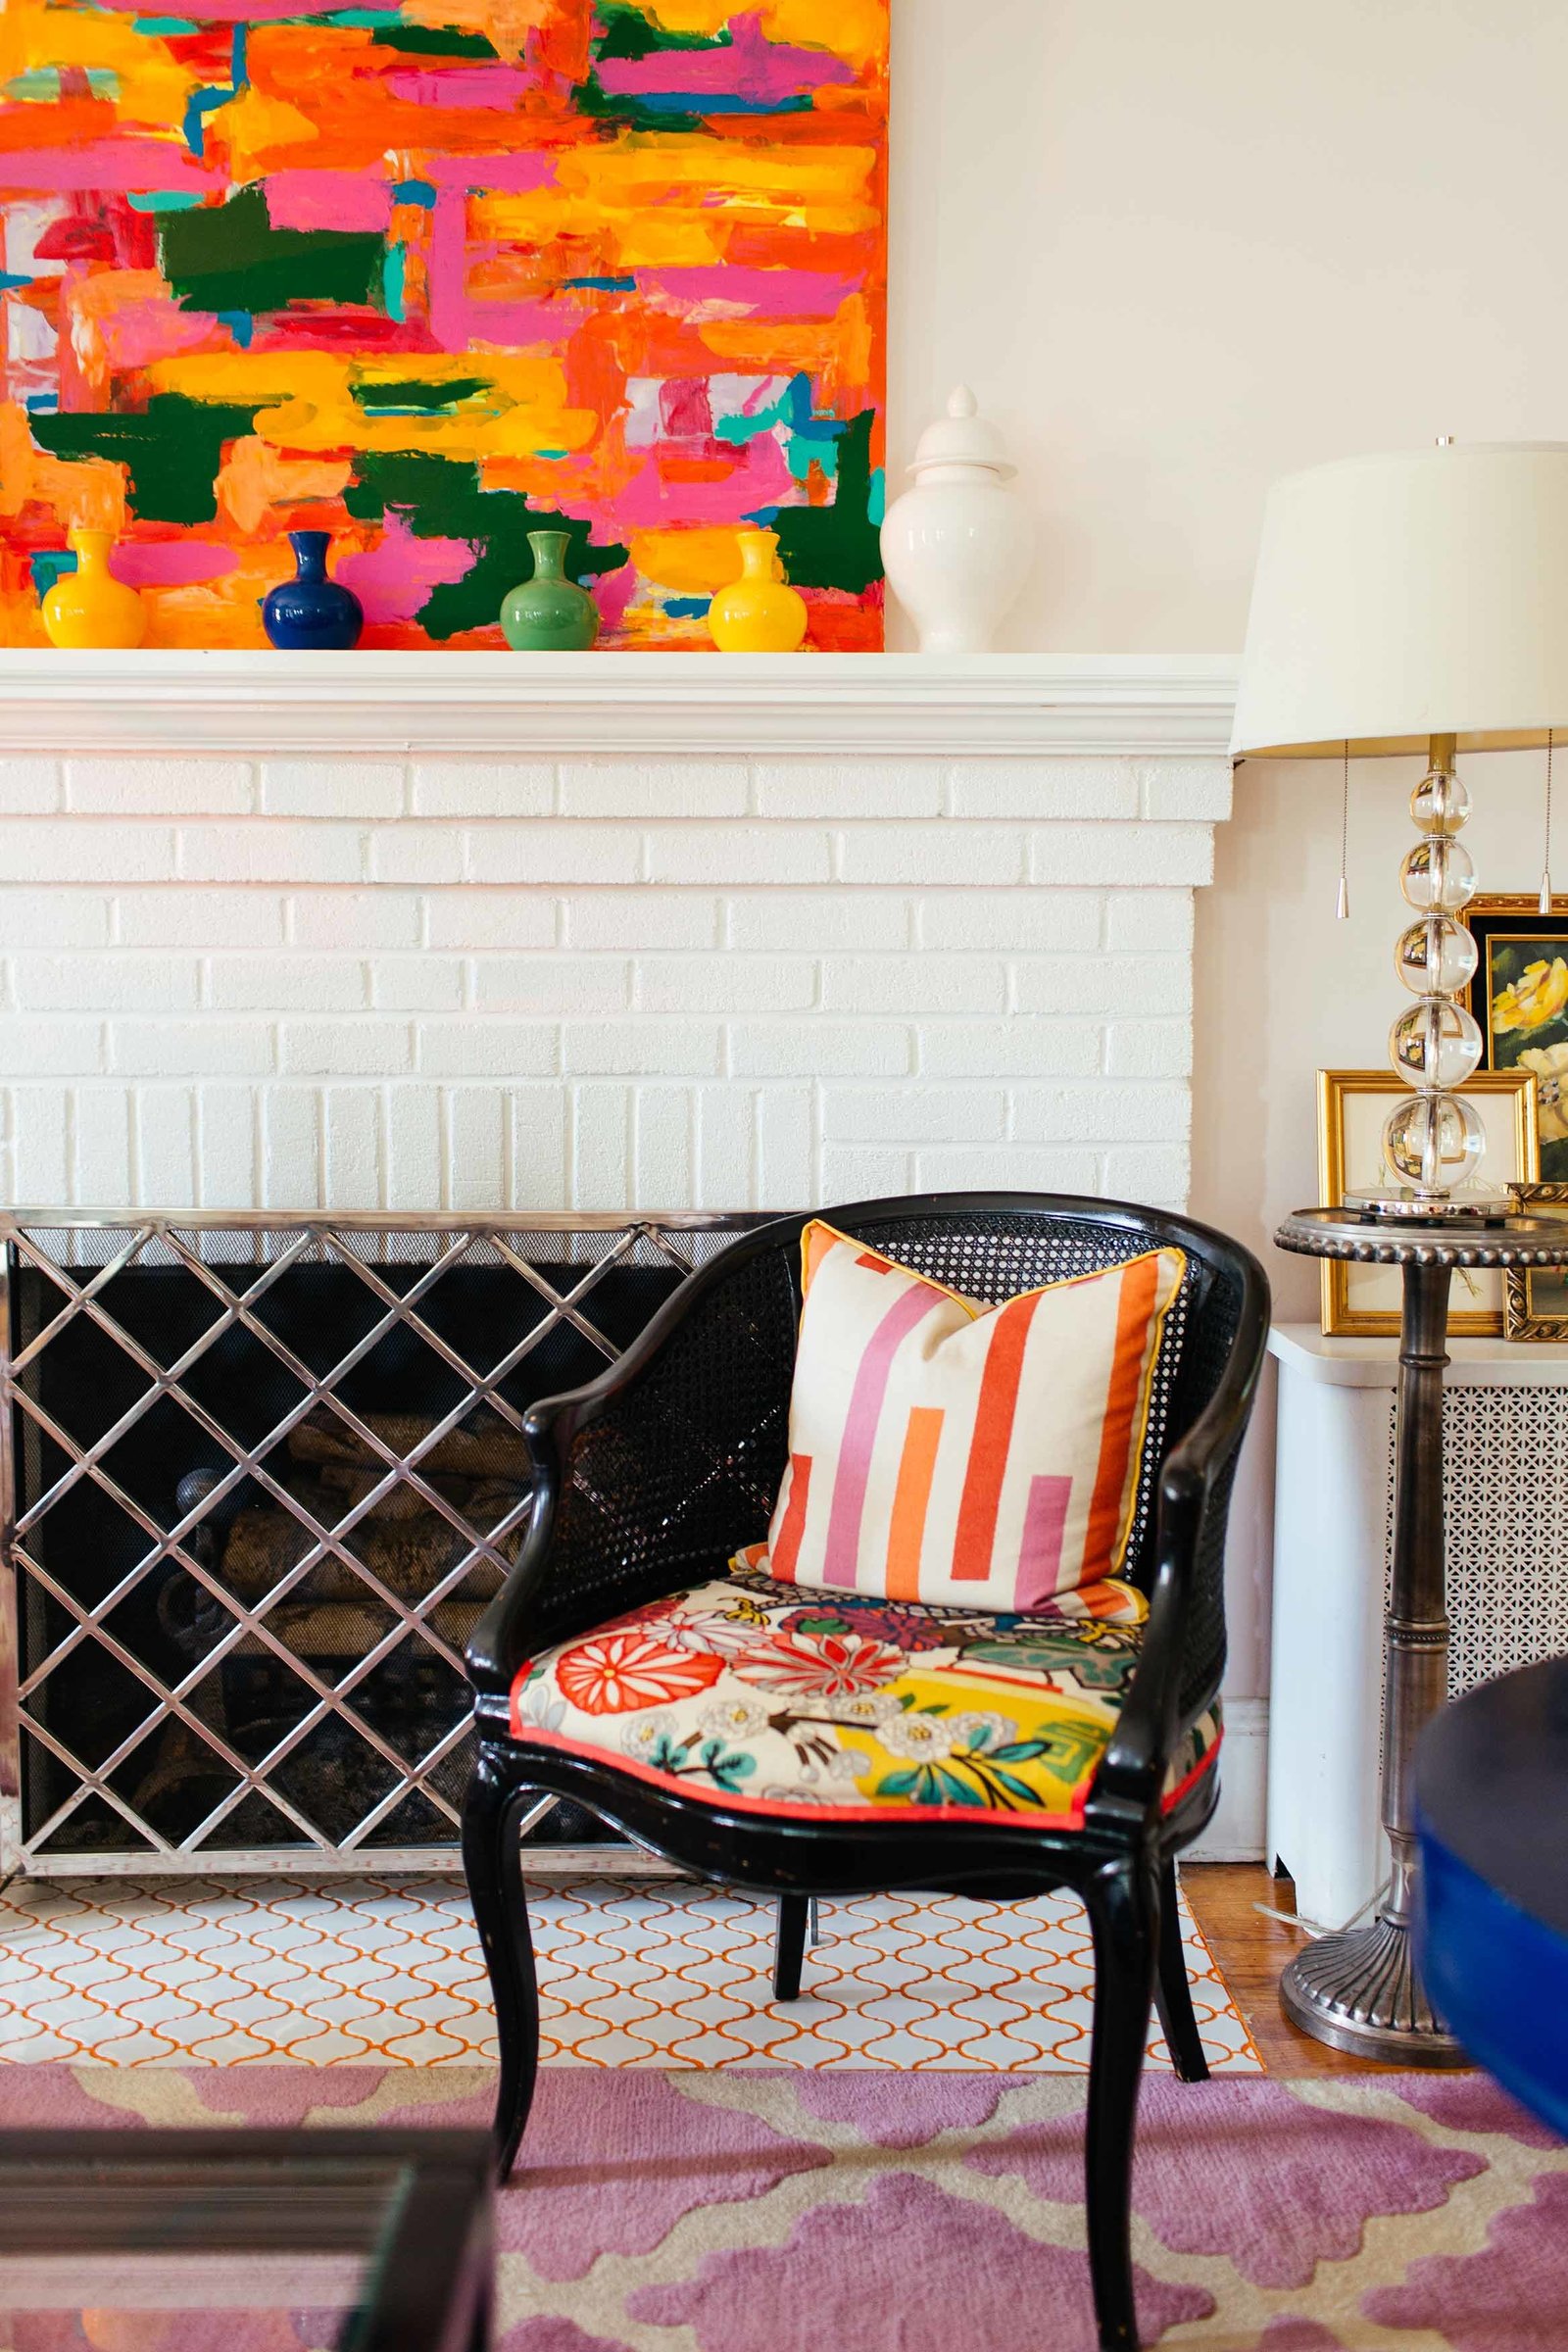 A white fireplace with a colorful abstract painting and black chair.